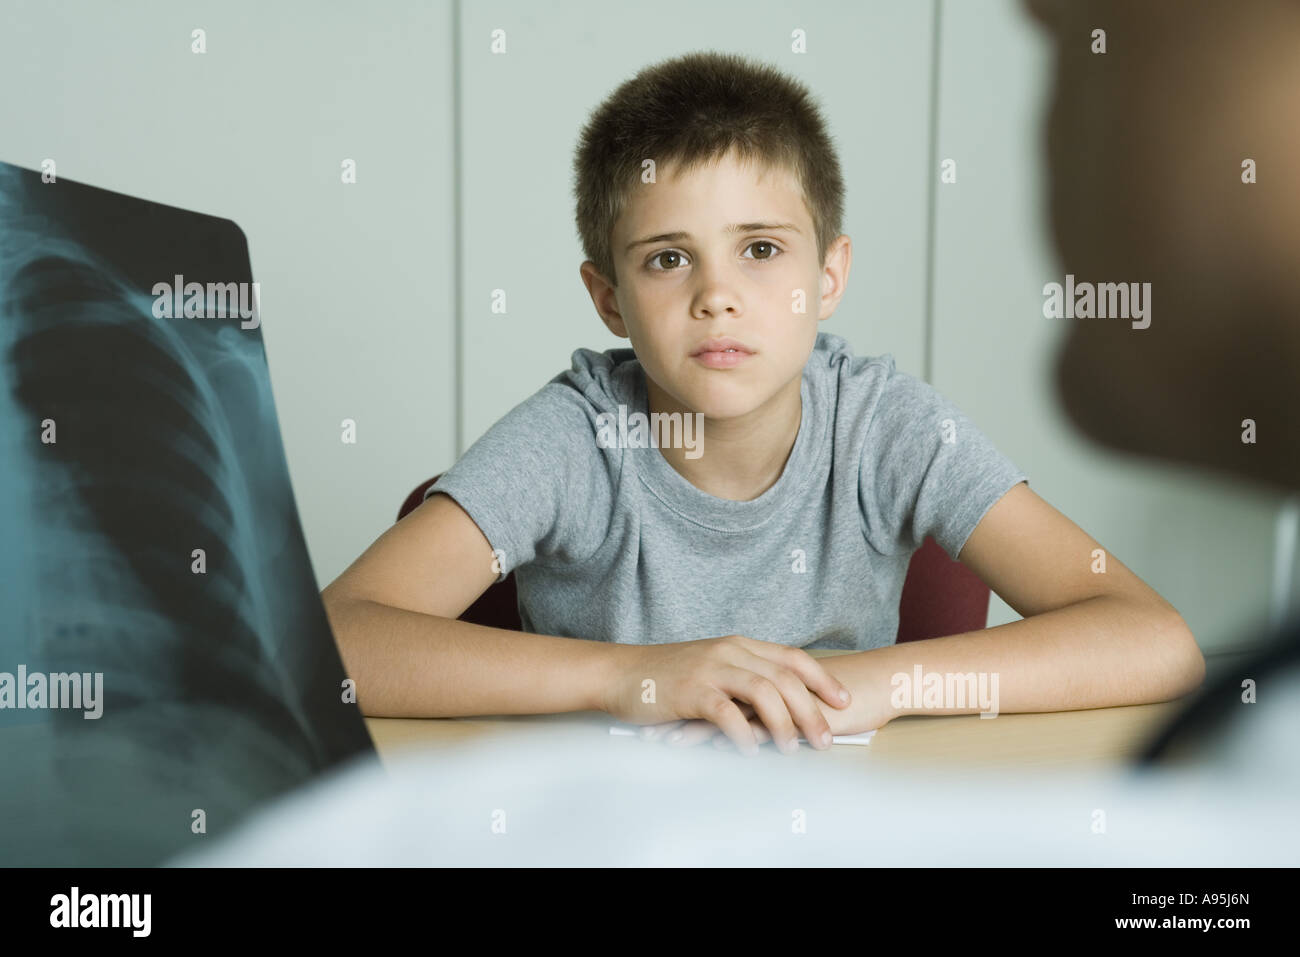 Doctor sitting across from boy, looking at x-ray Stock Photo